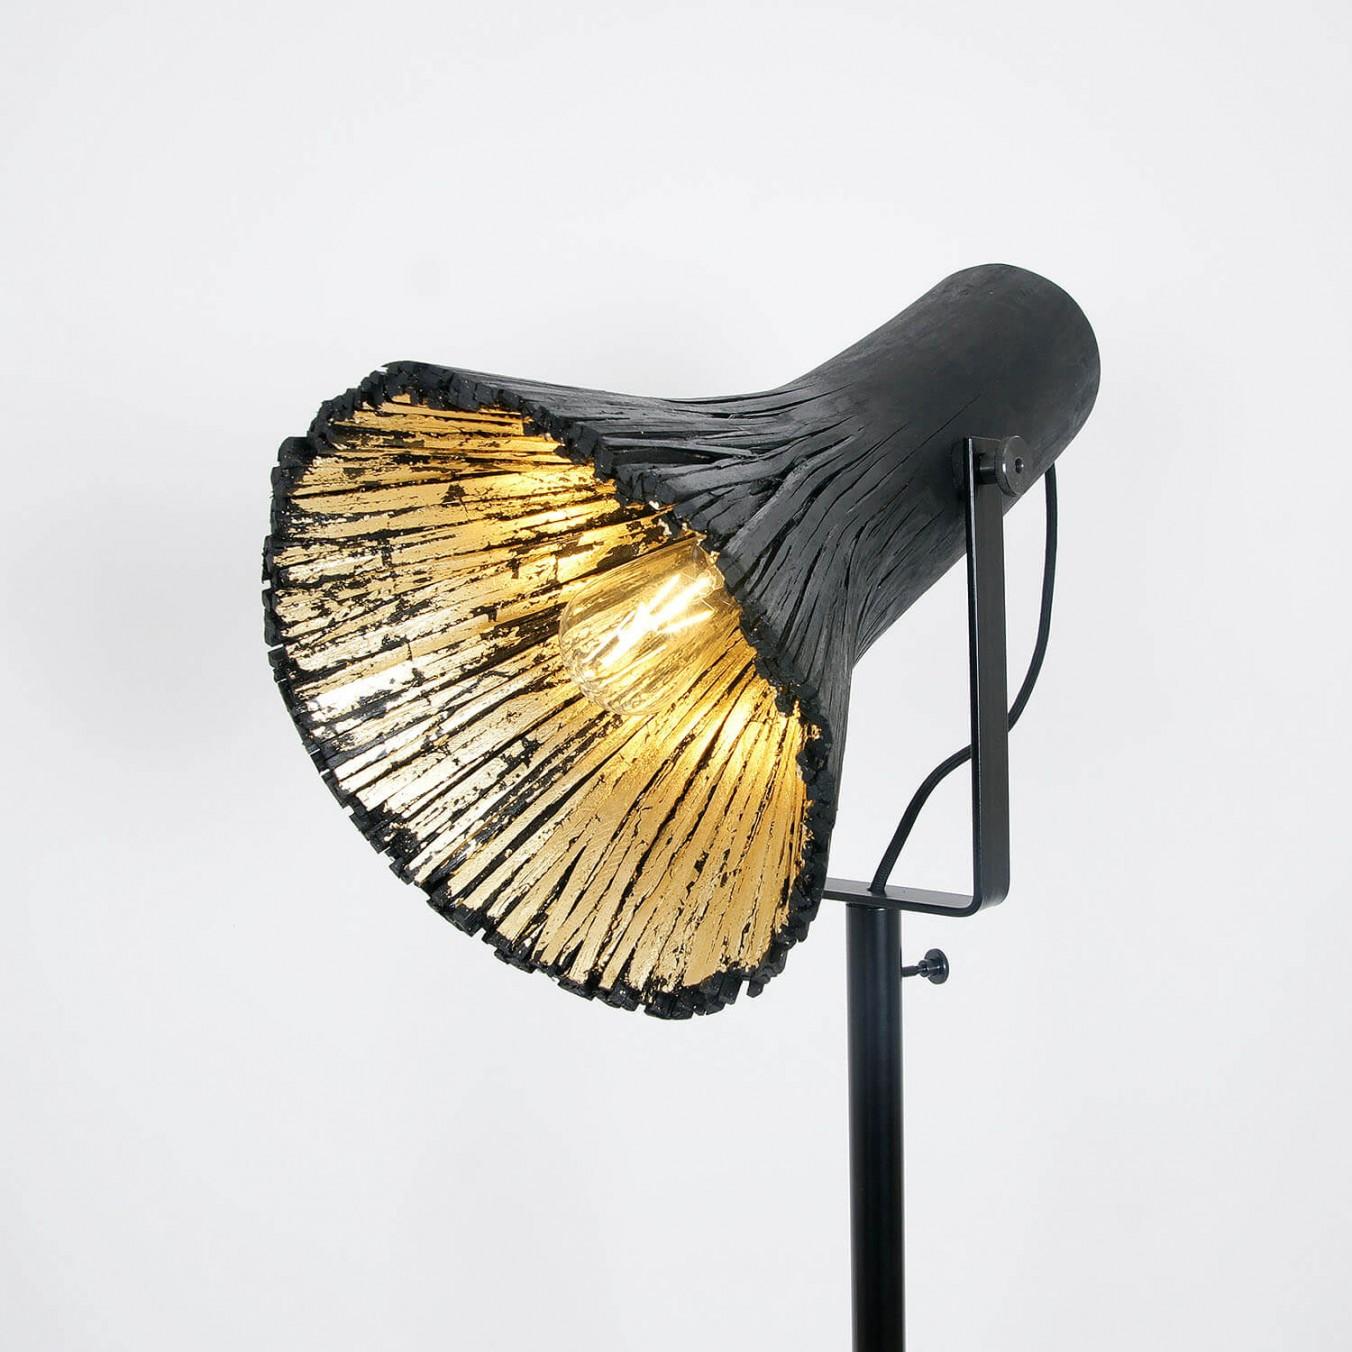 Contemporary Wood & Brass Floor Lamp, Pressed Wood Natural by Johannes Hemann In New Condition For Sale In Warsaw, PL